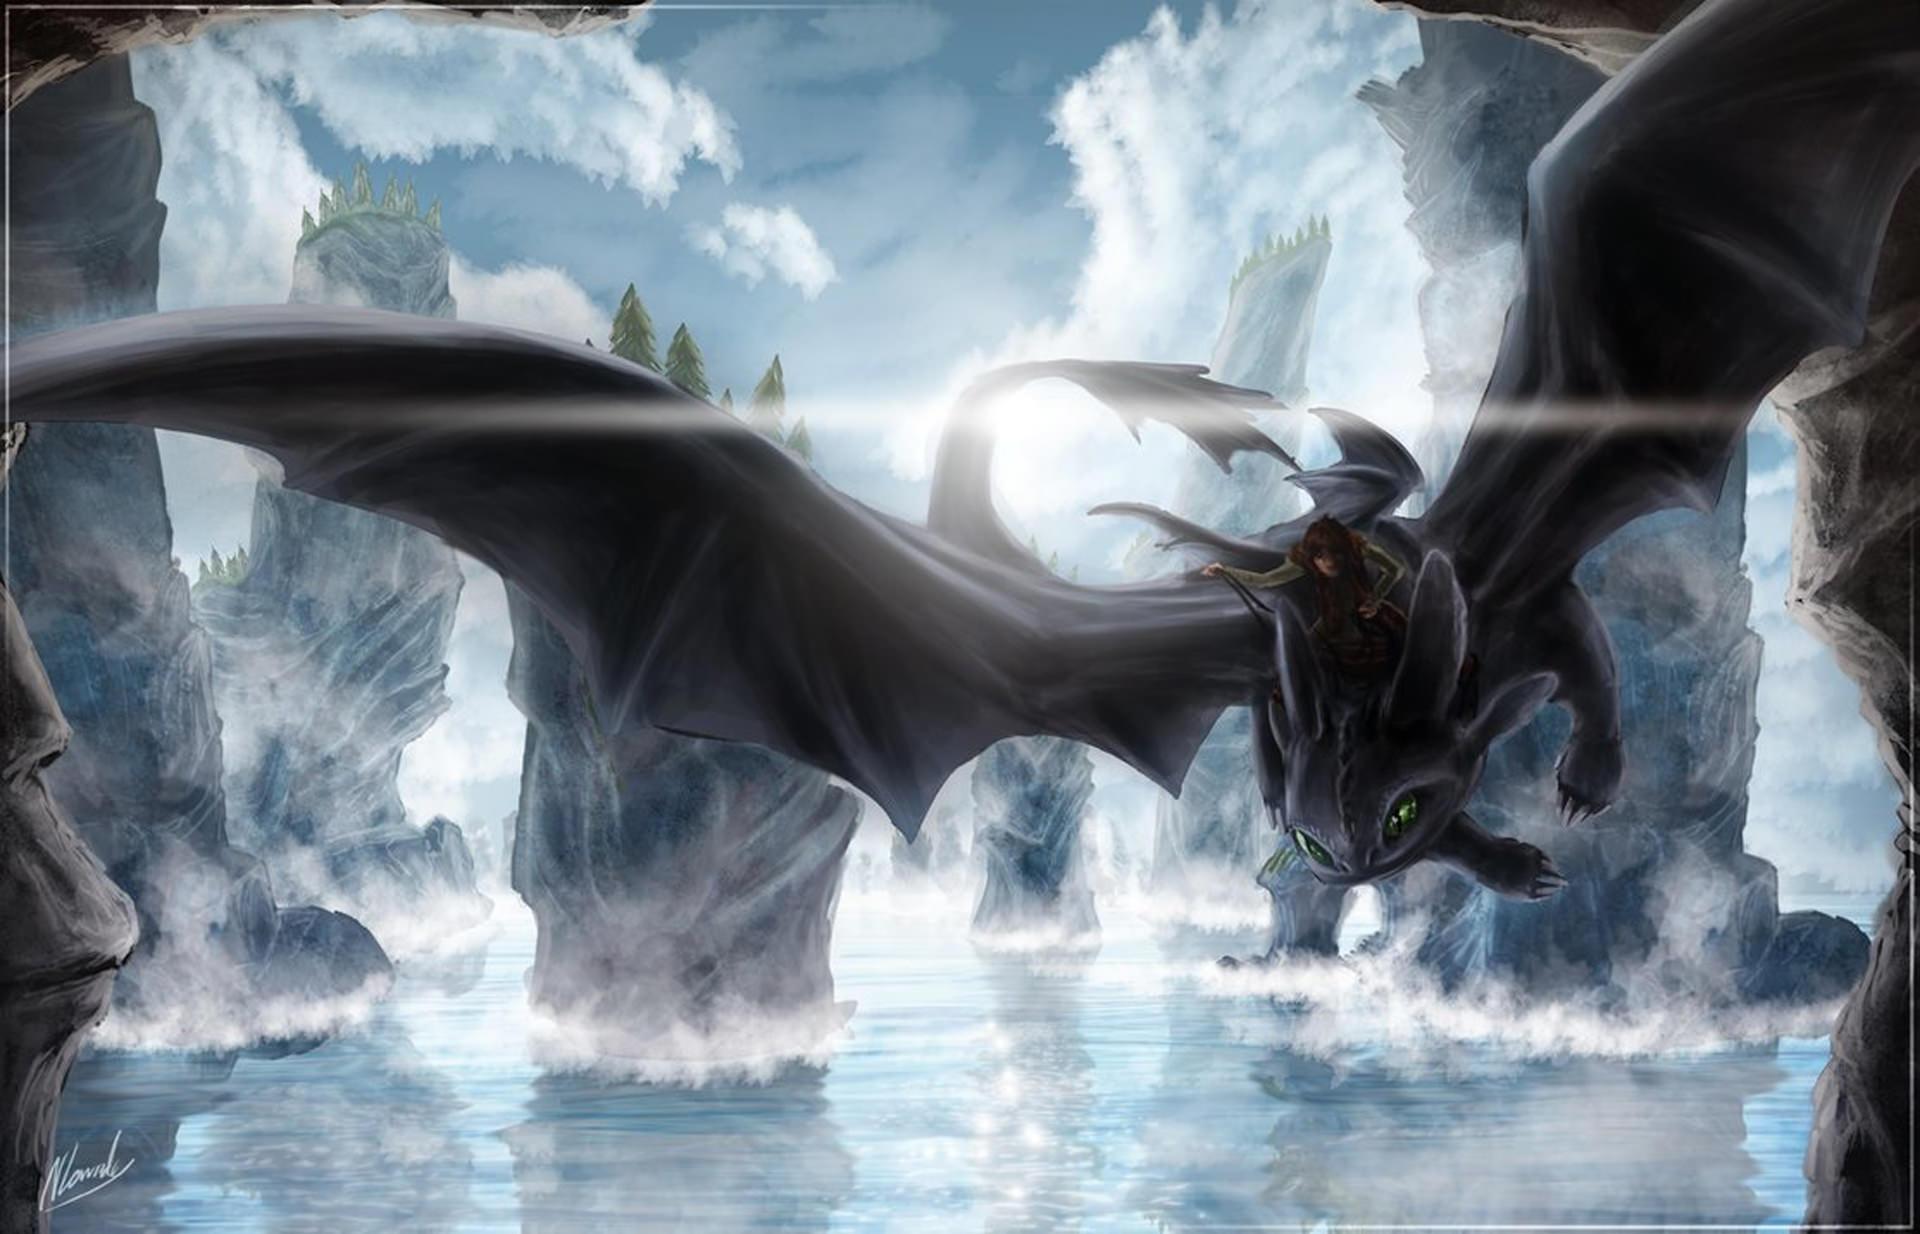 How to Train Your Dragon 2 Picture, Wallpaper and Desktop Background